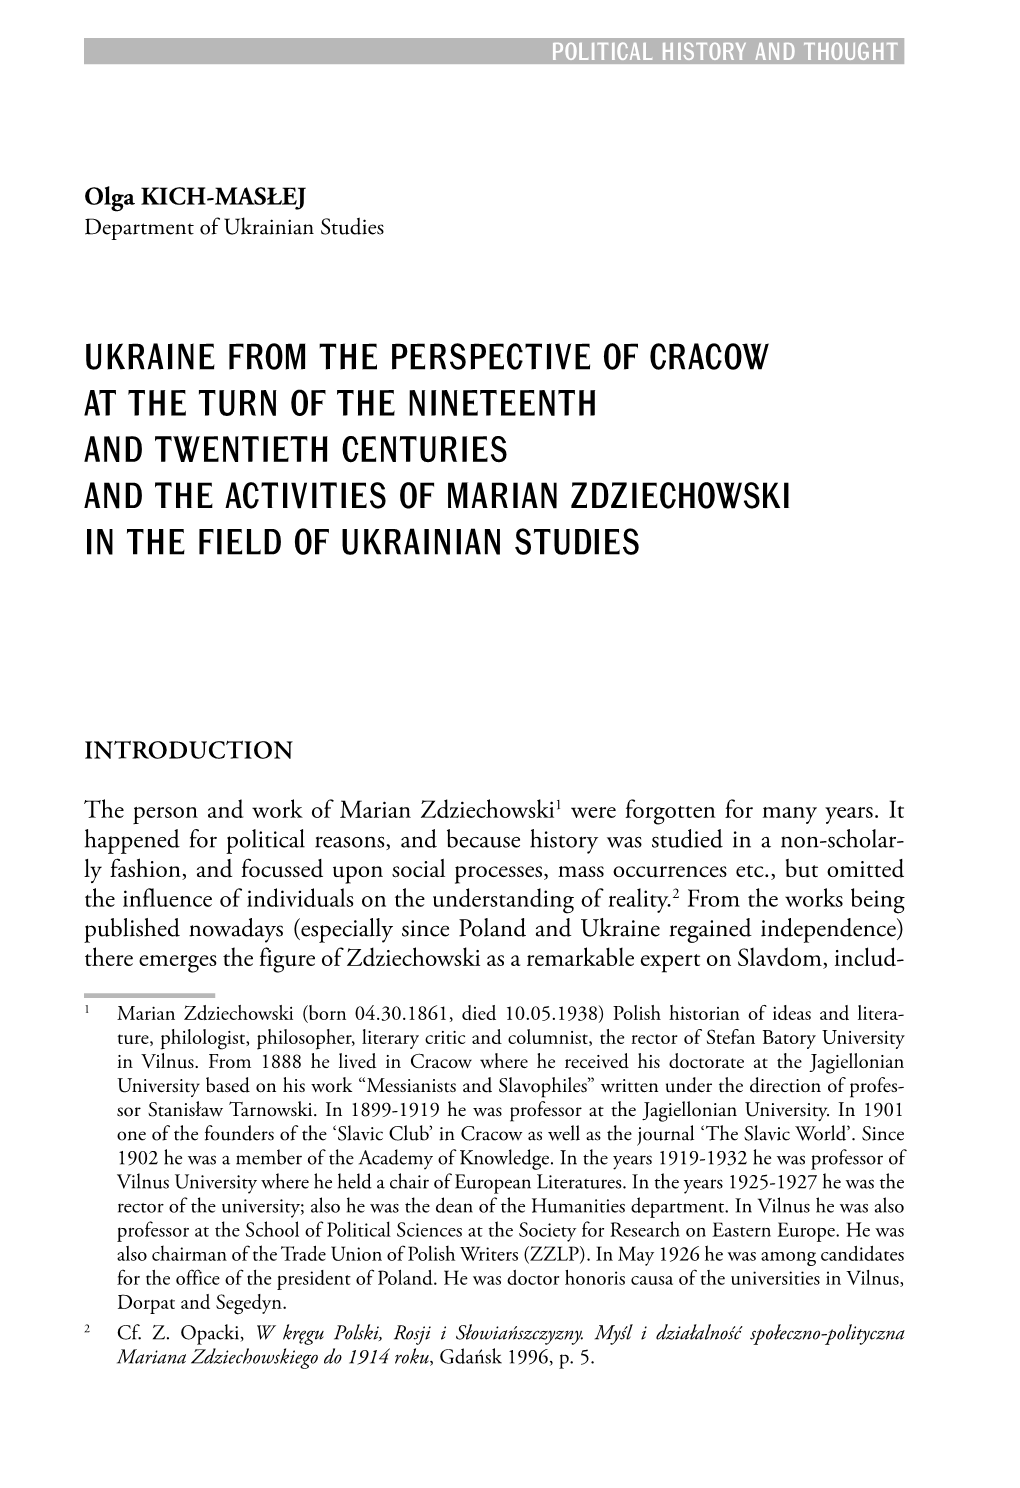 Ukraine from the Perspective of Cracow at the Turn of the Nineteenth And